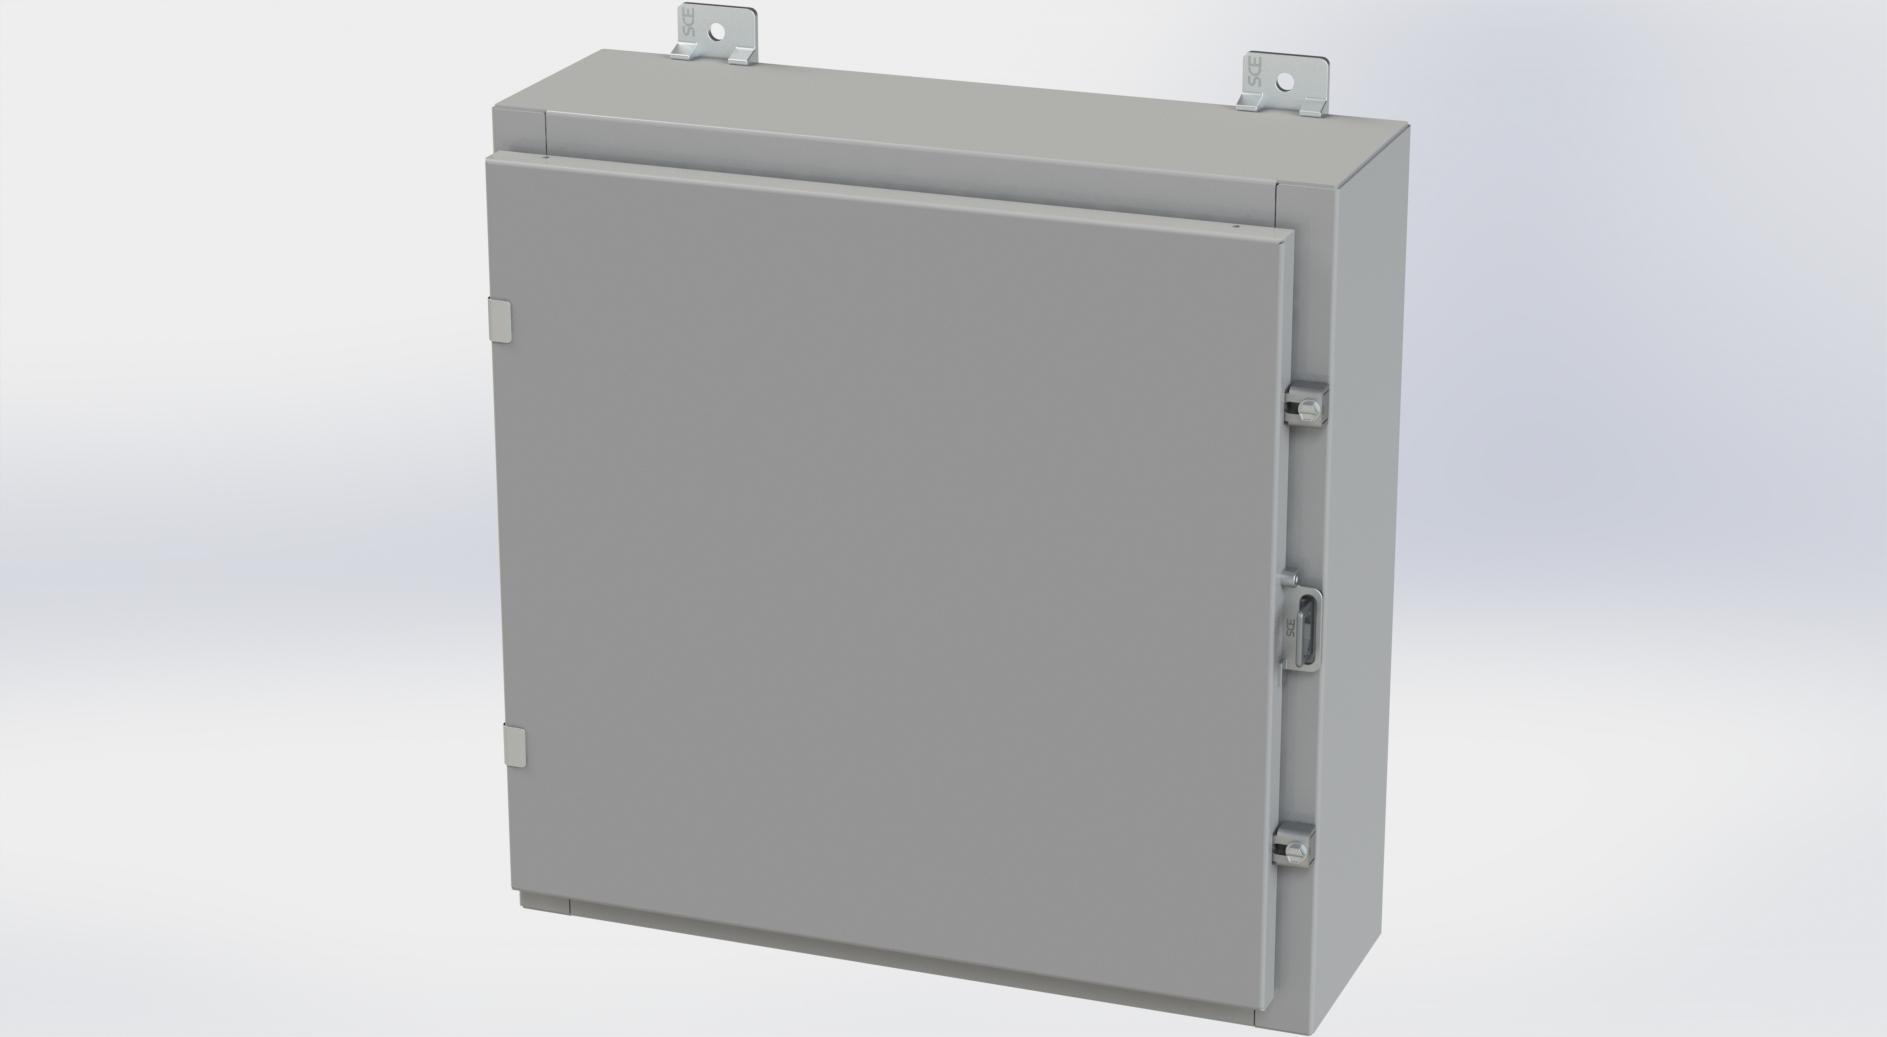 Saginaw Control SCE-20H2006LP Nema 4 LP Enclosure, Height:20.00", Width:20.00", Depth:6.00", ANSI-61 gray powder coating inside and out. Optional panels are powder coated white.